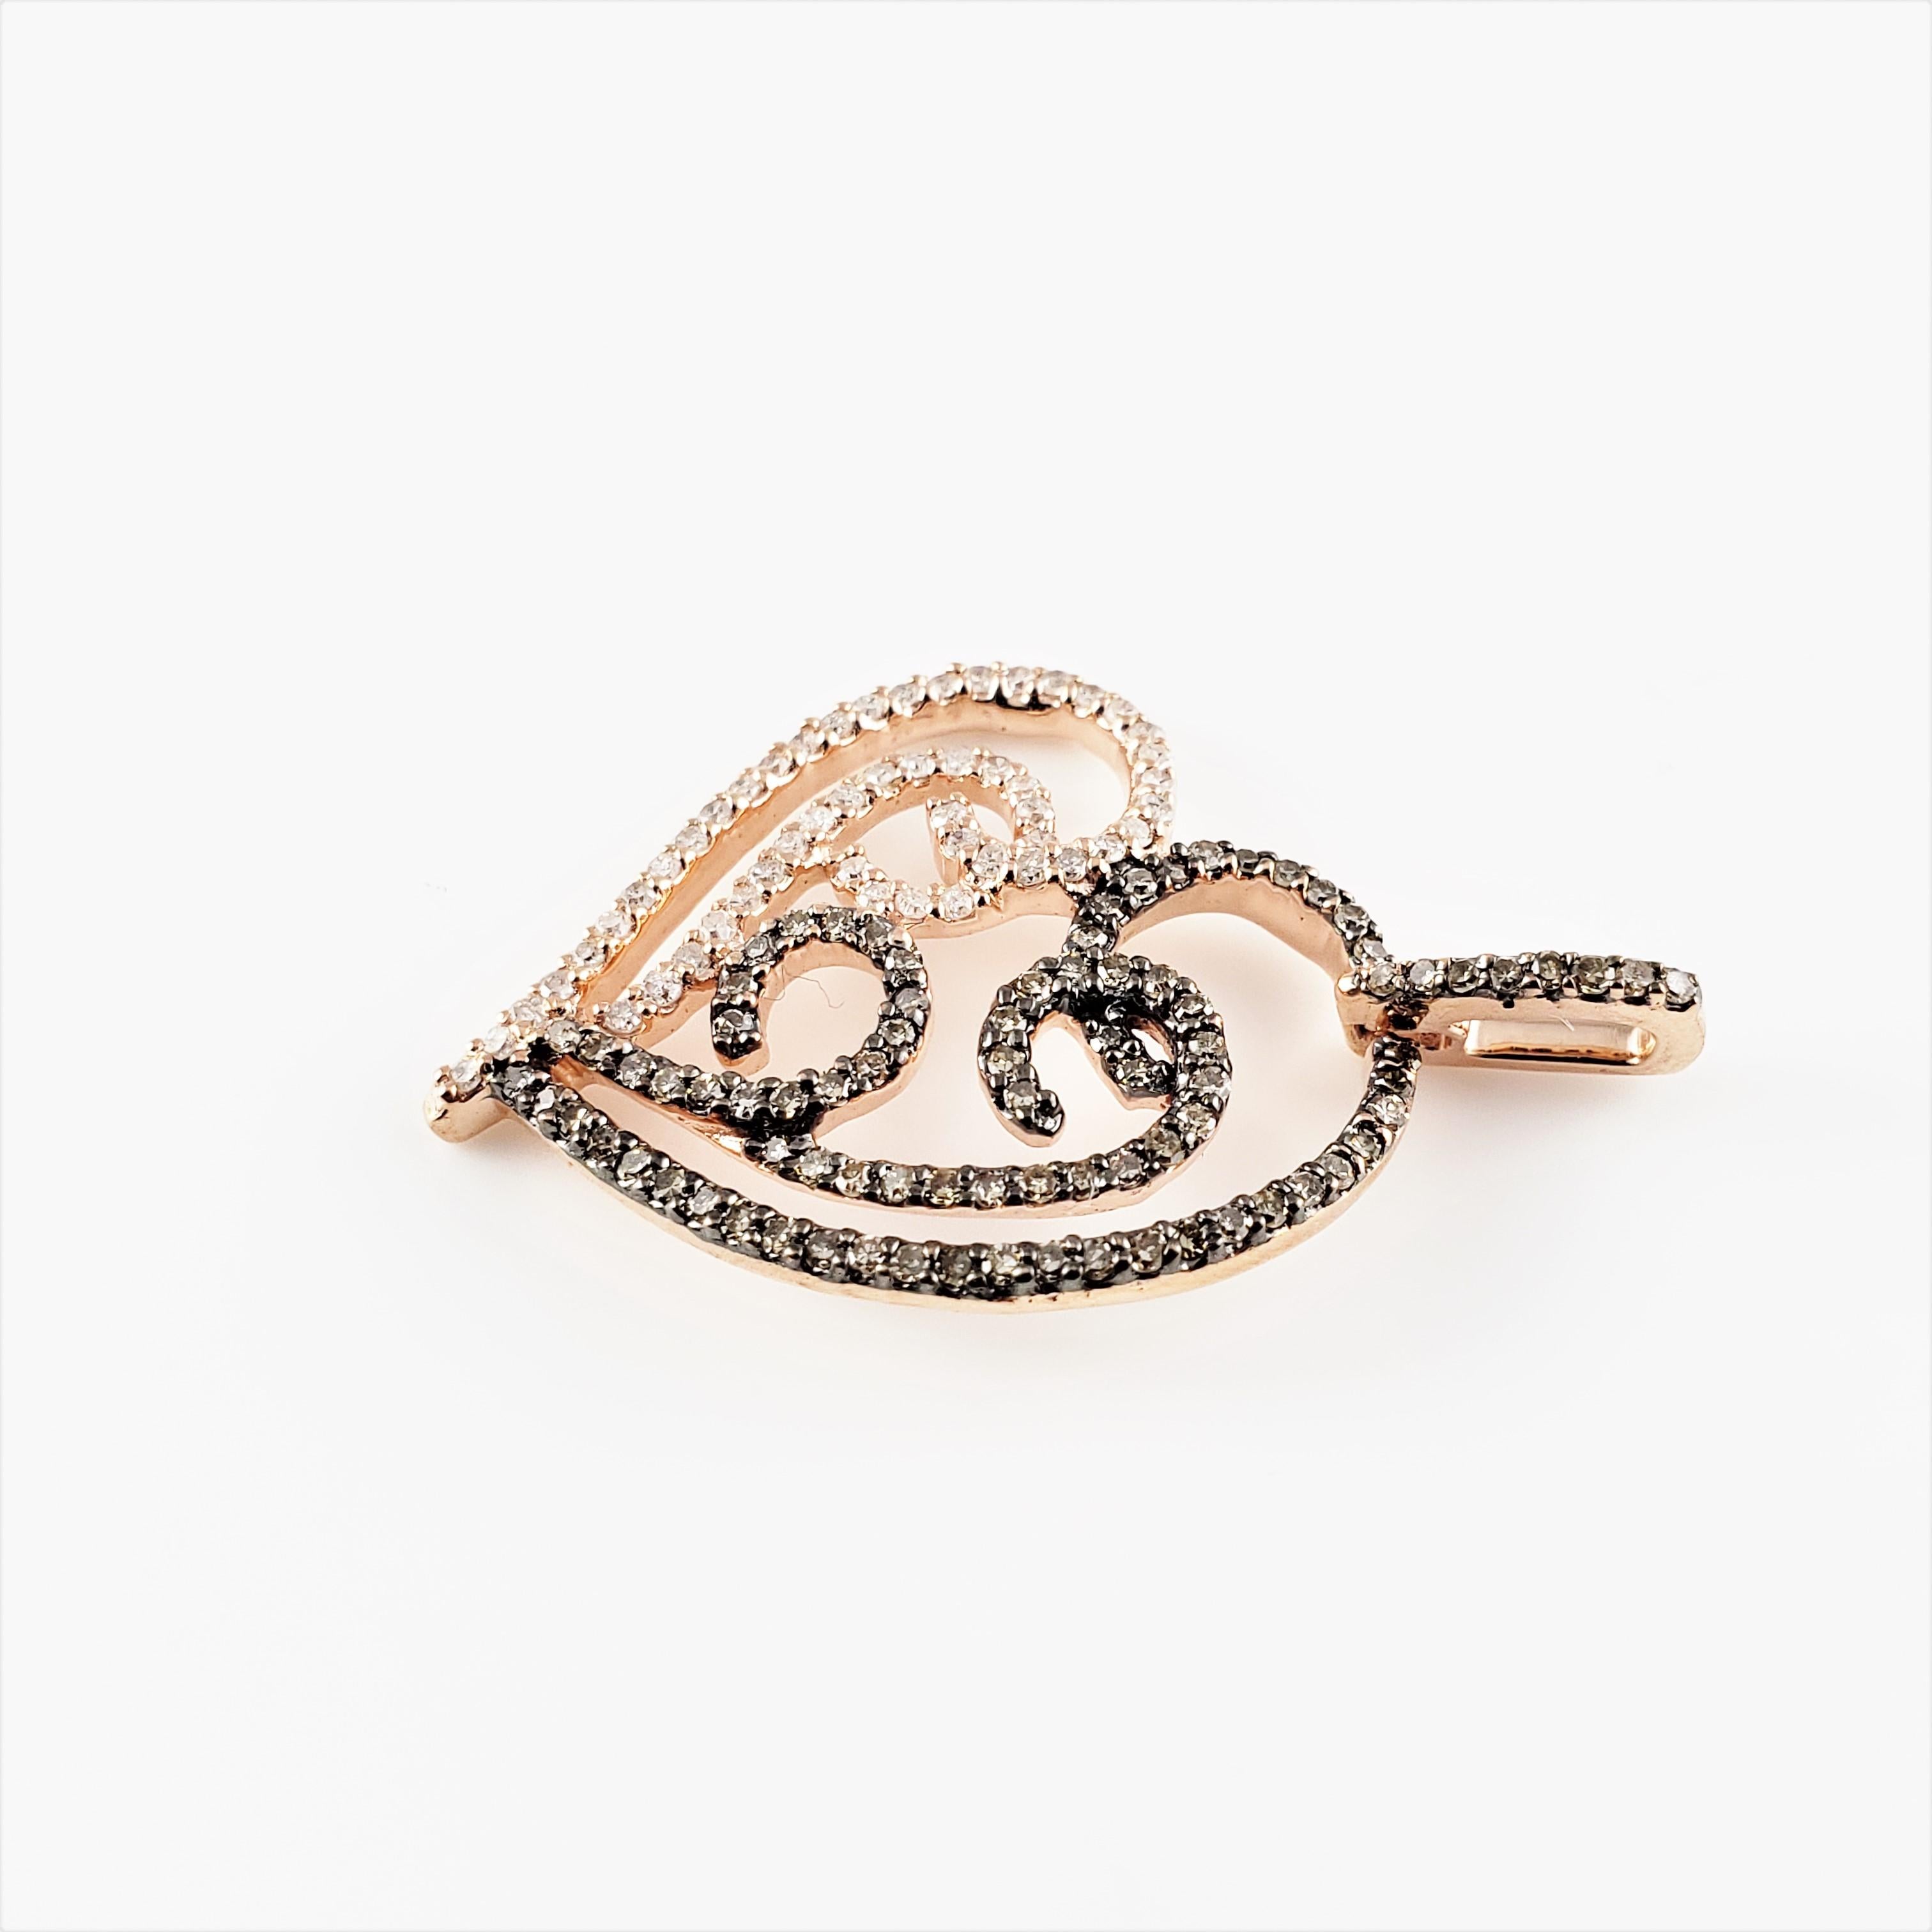 Vintage 10 Karat Rose Gold Champagne and White Diamond Heart Pendant-

This lovely heart pendant features 54 white round single cut diamonds and 82 champagne round single cut diamonds set in 10K rose gold.

Approximate total diamond weight: .68